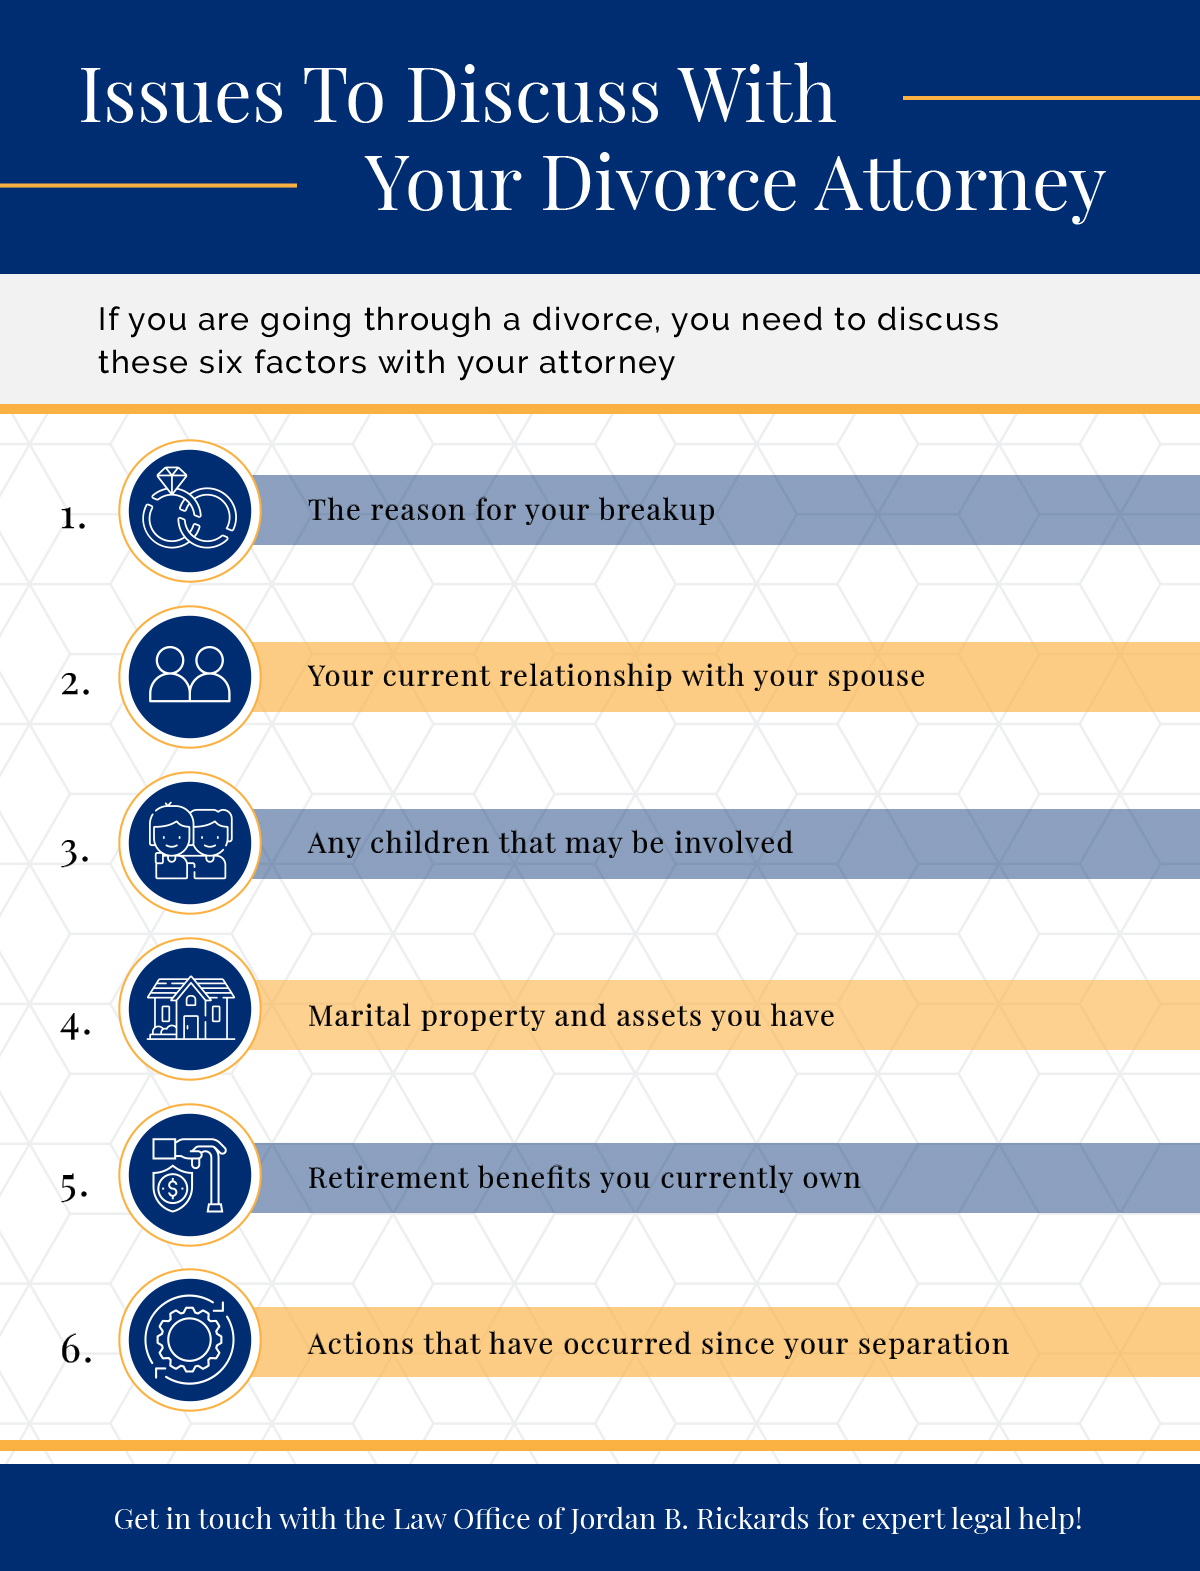 Issues To Discuss With Your Divorce Attorney